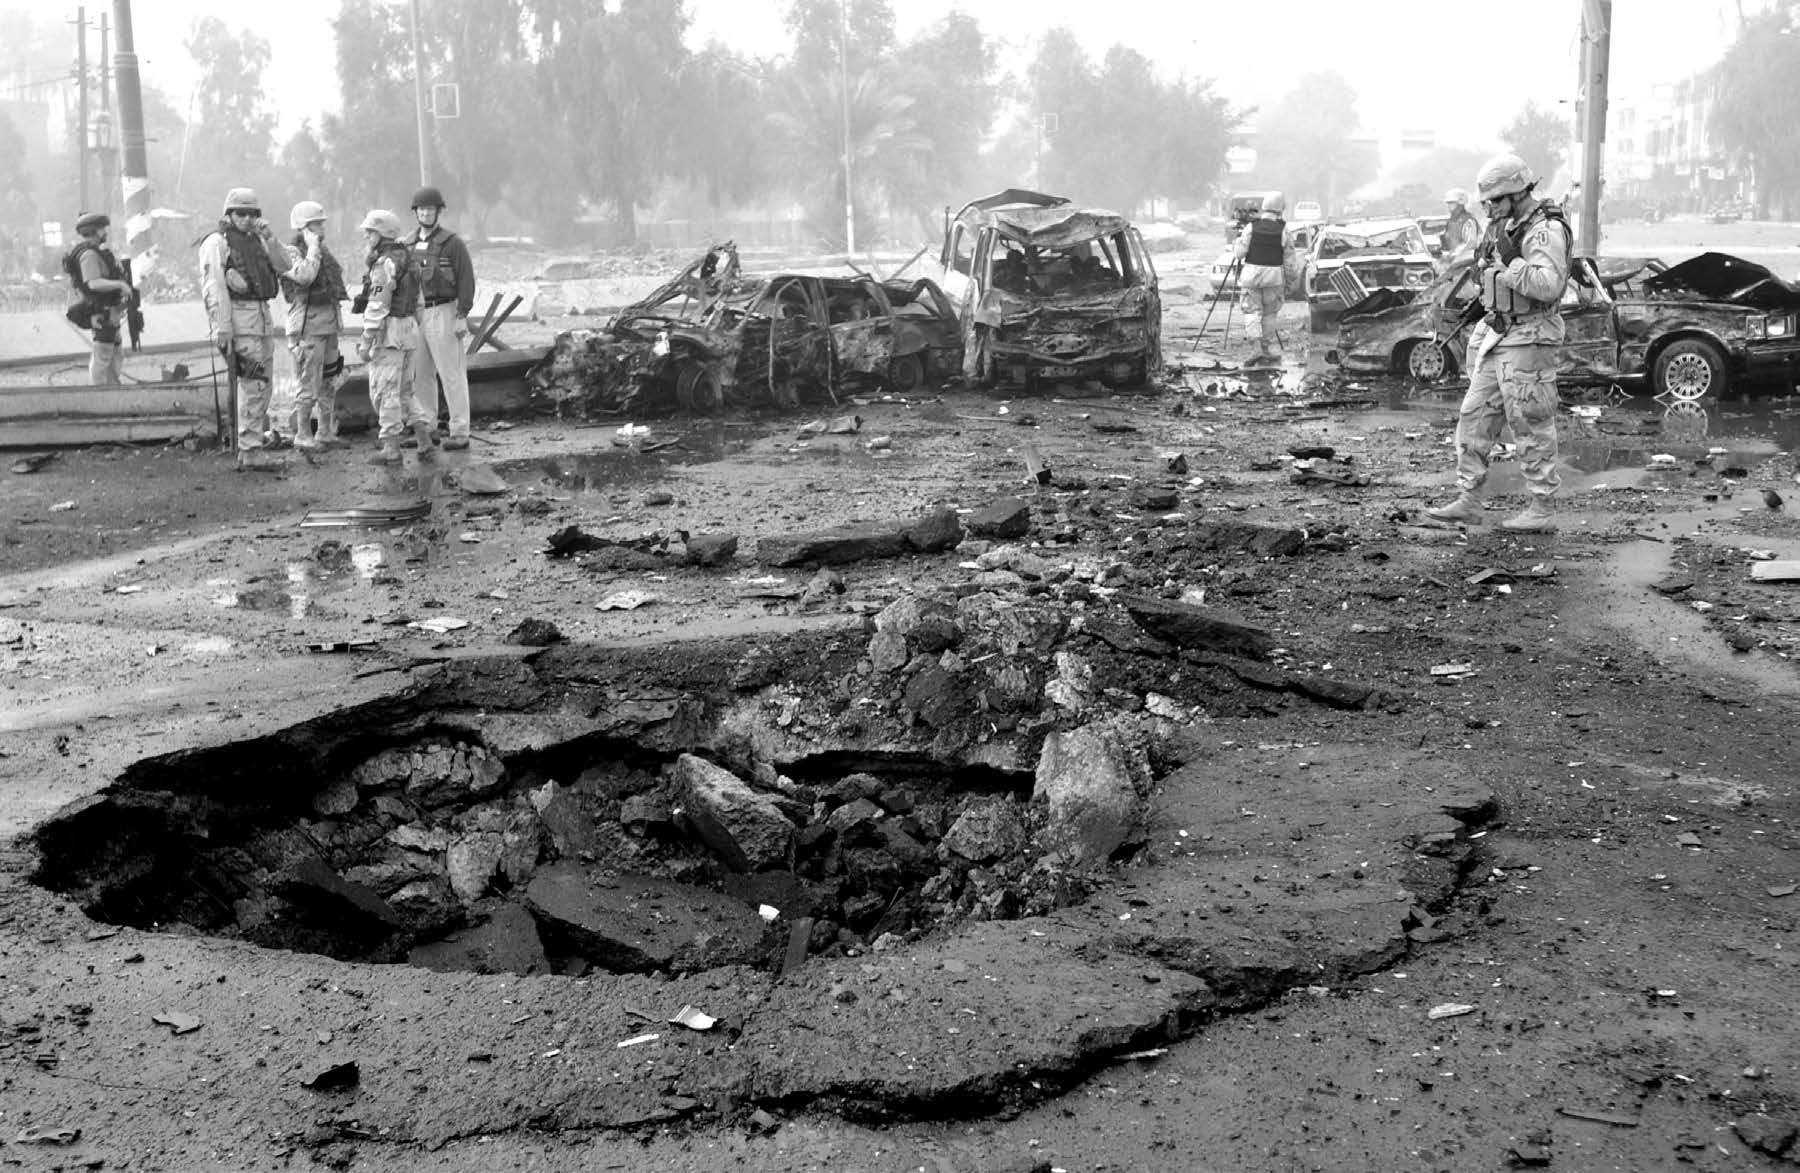 Several people were killed during a suspected car bombing outside Entrance 1 to the Coalition Provisional Authority on January 18, 2004, at 8:03 a.m. local time. The vehicle exploded in the middle of the intersection outside the gate, causing massive destruction. Courtesy of DoD.